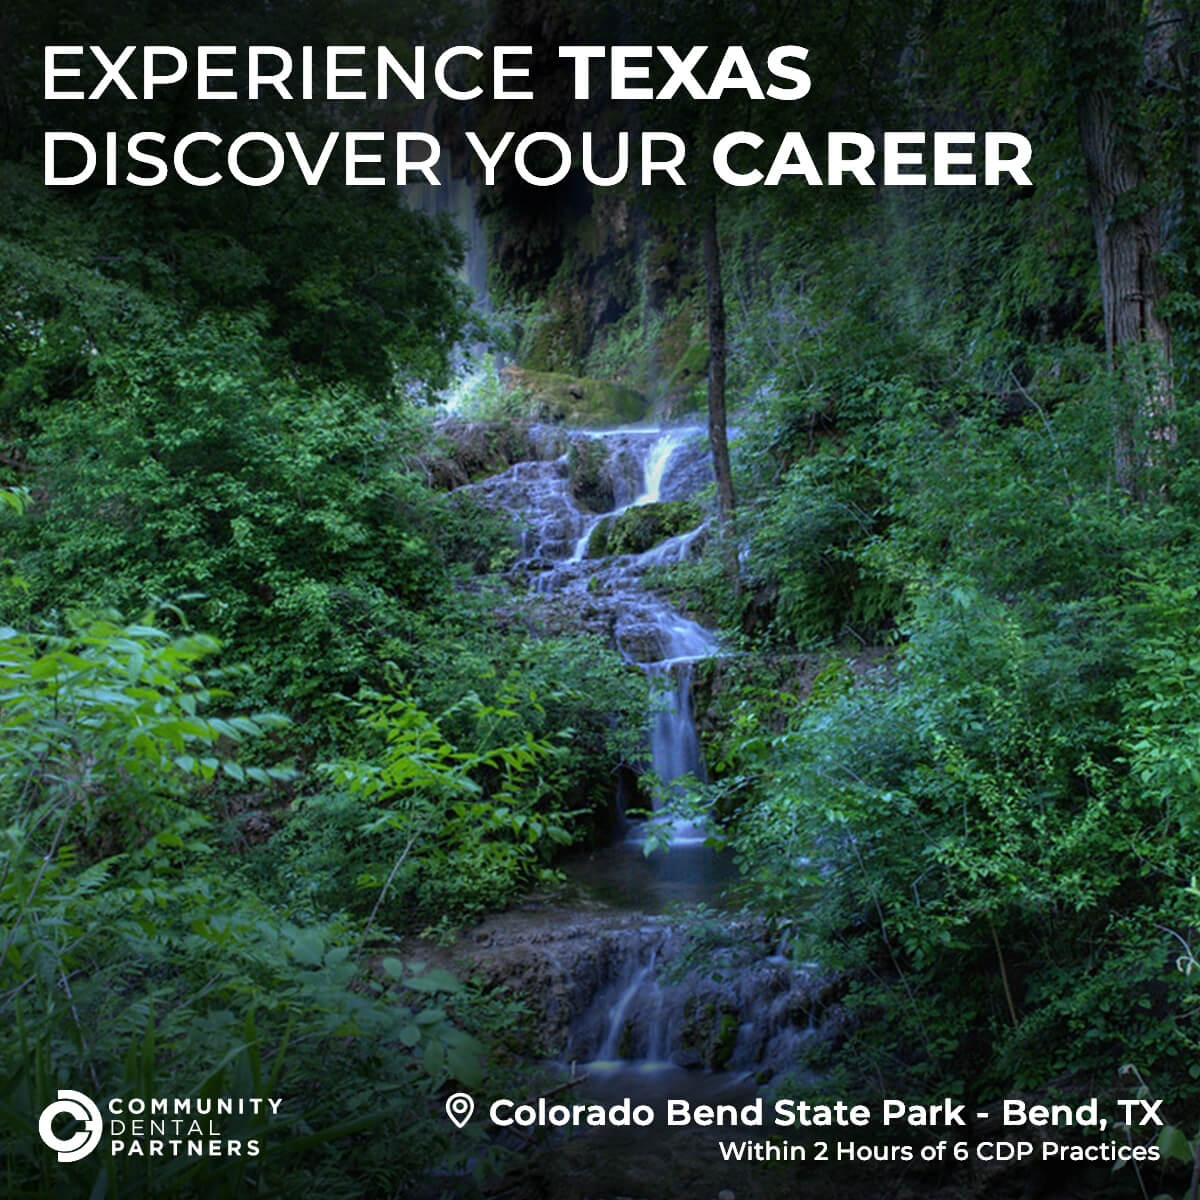 A photo of Colorado Bend State Park, with "Experience Texas, Discover Your Career" overlaid. This Park in Bend, TX, is within 2 hours of 6 CDP practices.